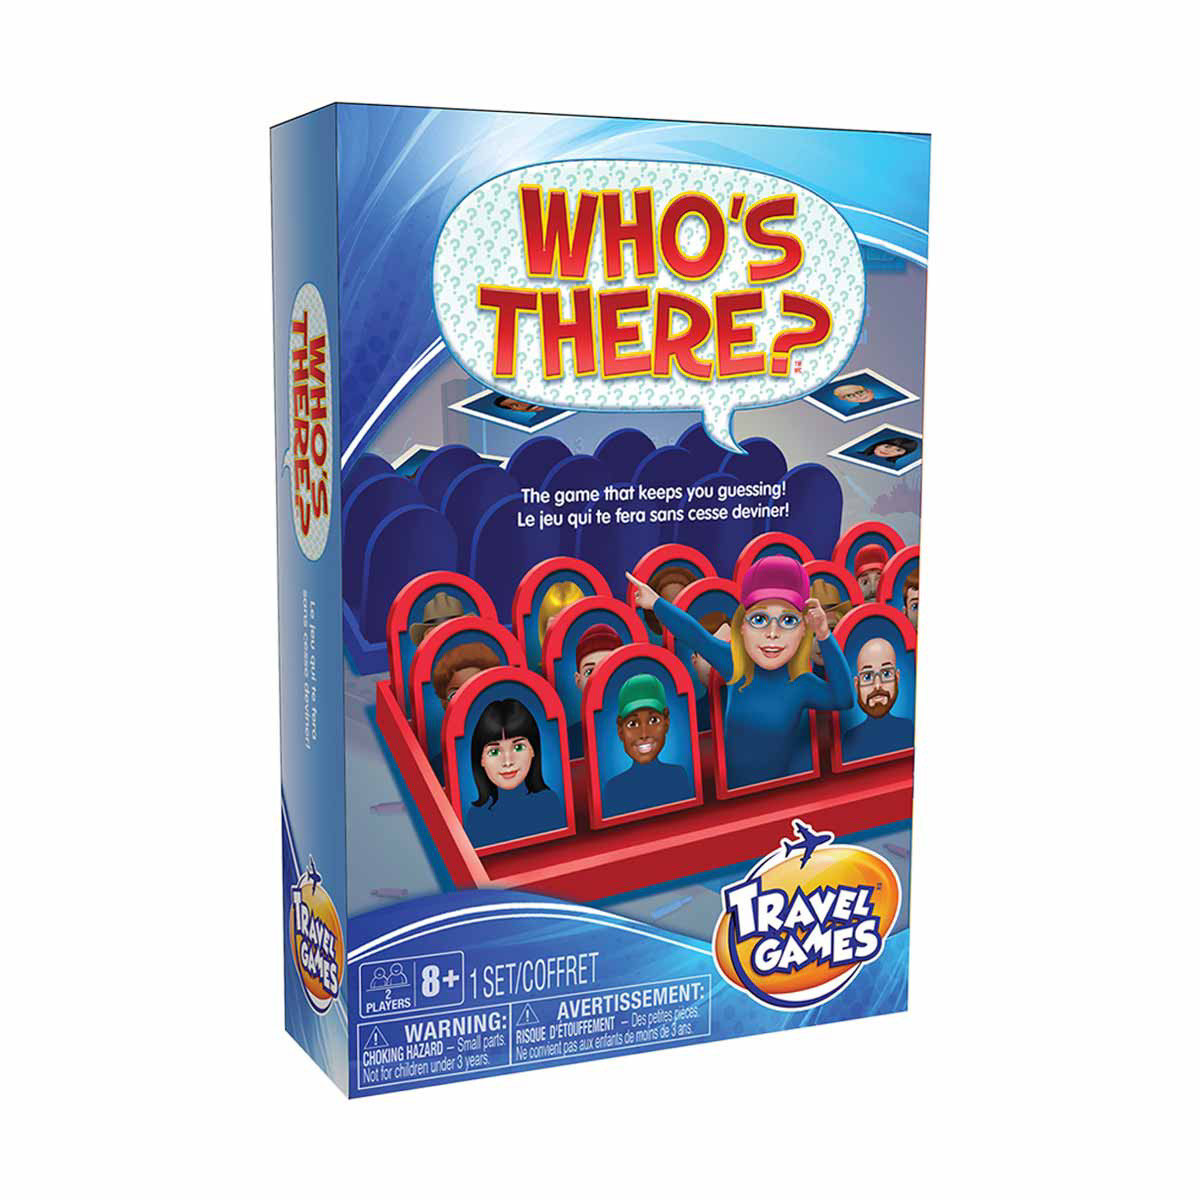 Family Board Games, Travel Sized, Assortment